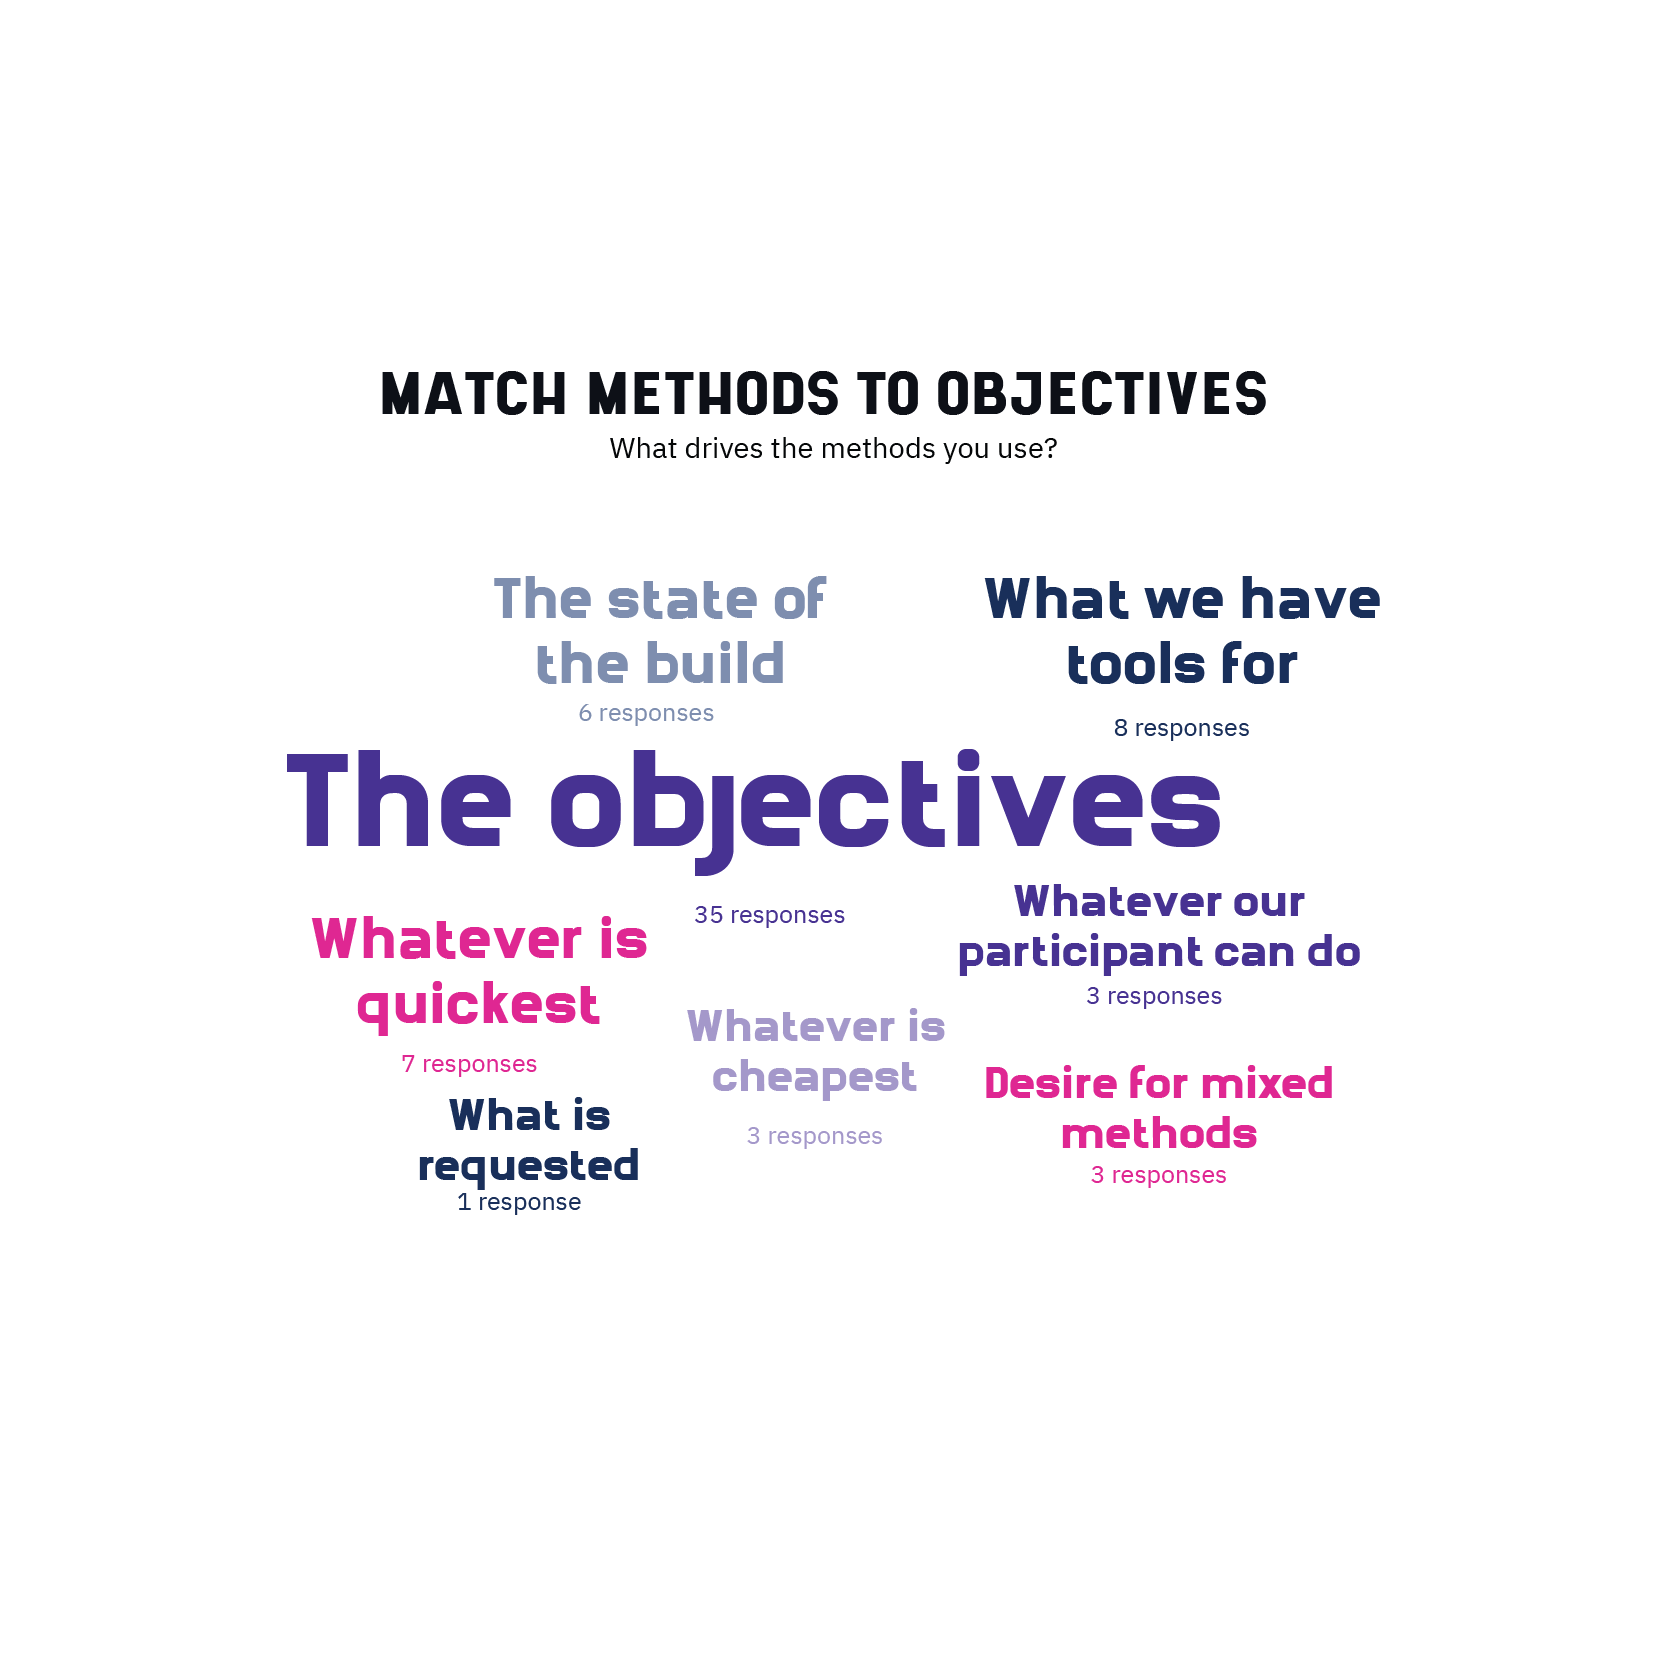 Match methods to objectives